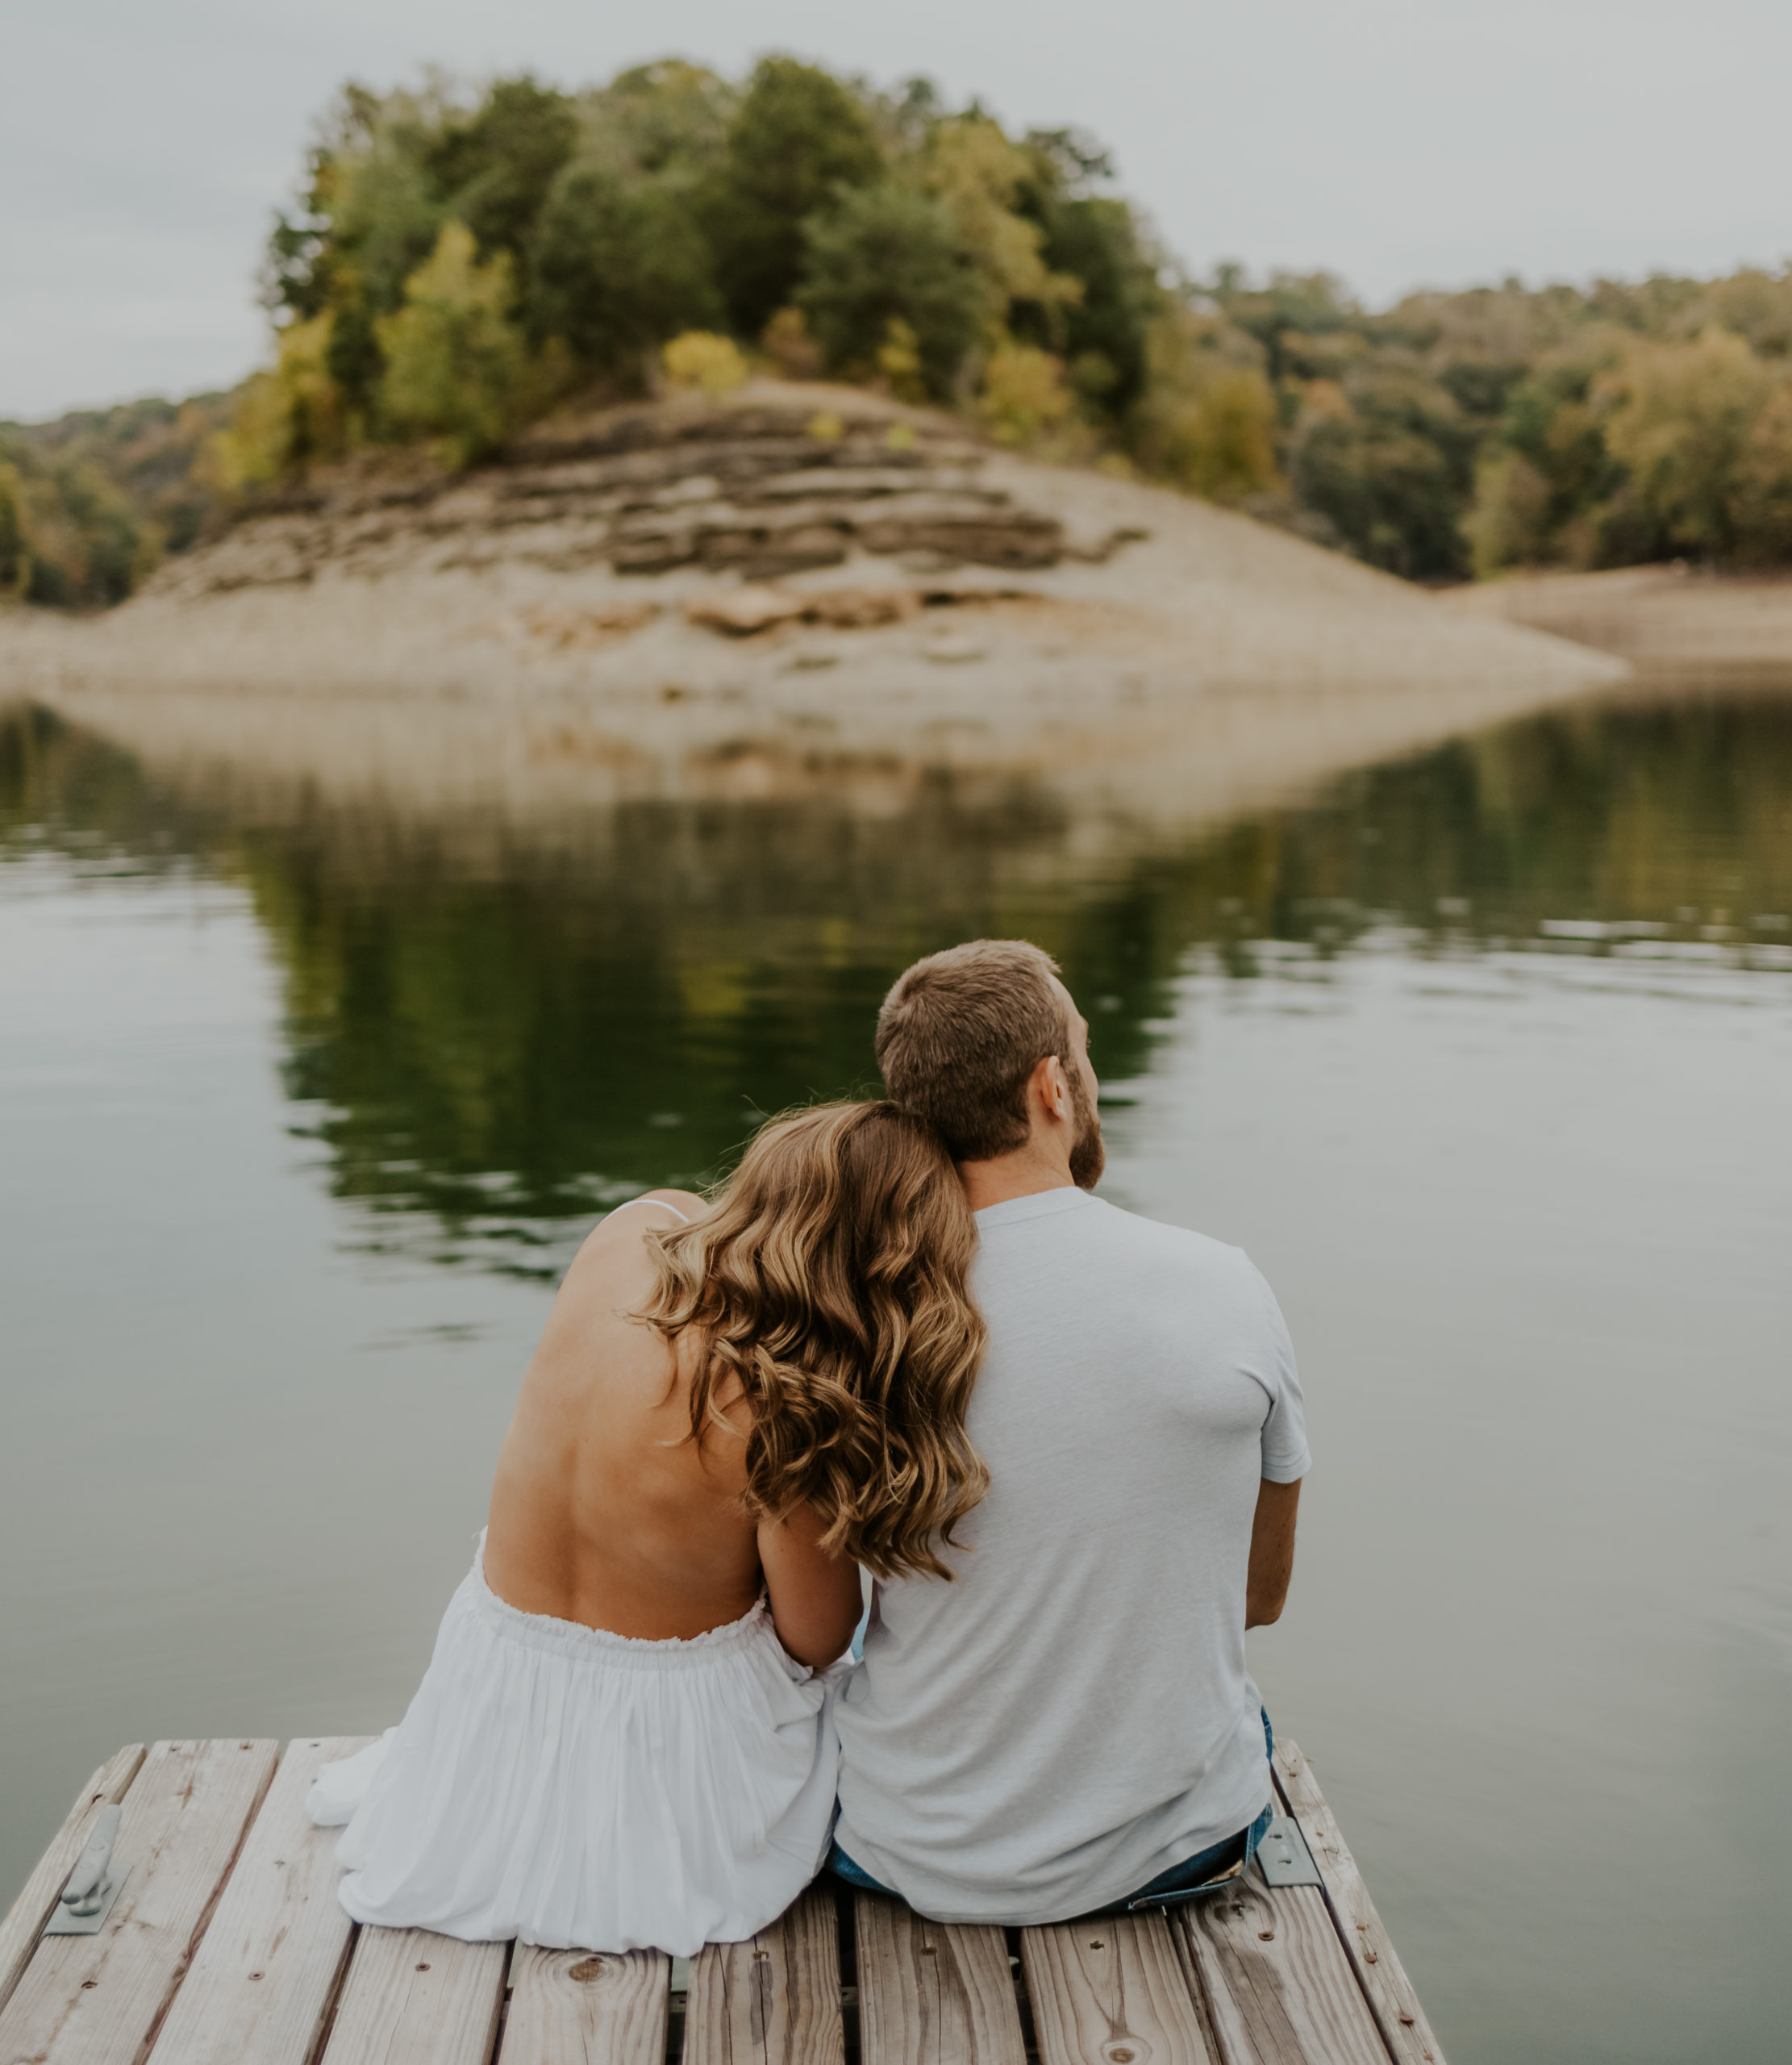 Lake cumberland couple posed on a dock overlooking the water in Kentucky.